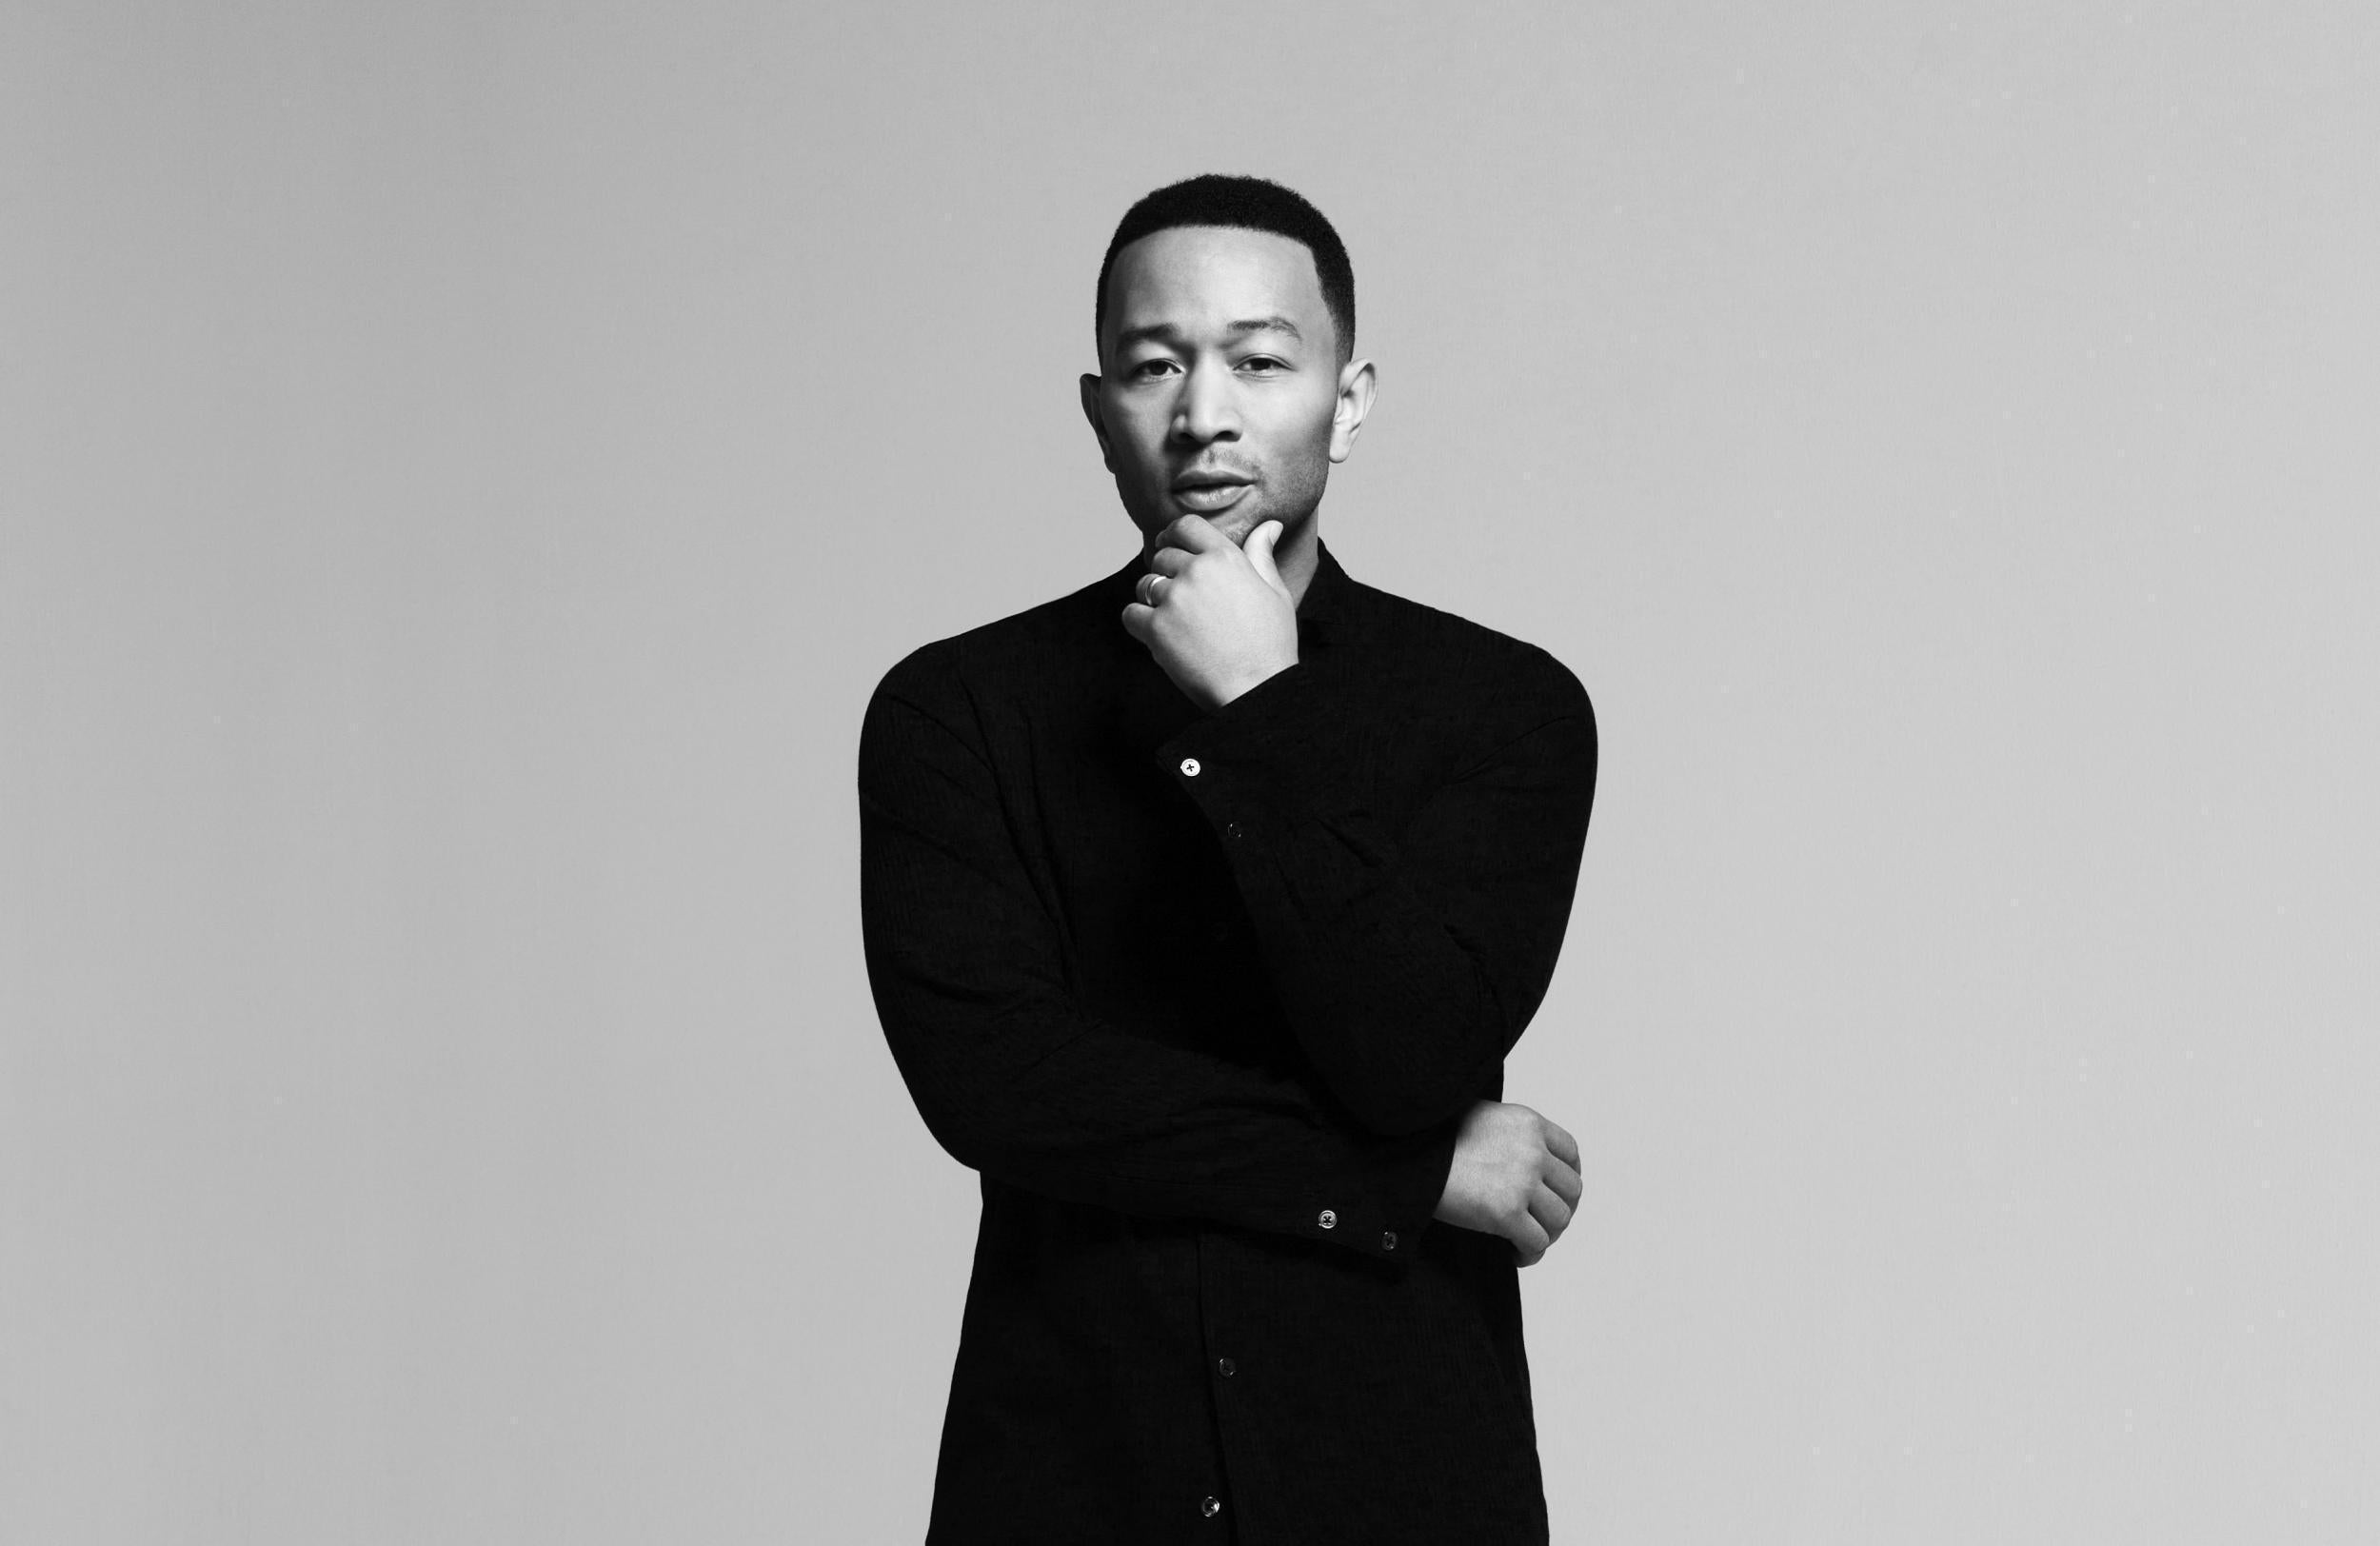 Finding light in the darkness: John Legend hopes people will stop ‘operating out of fear’